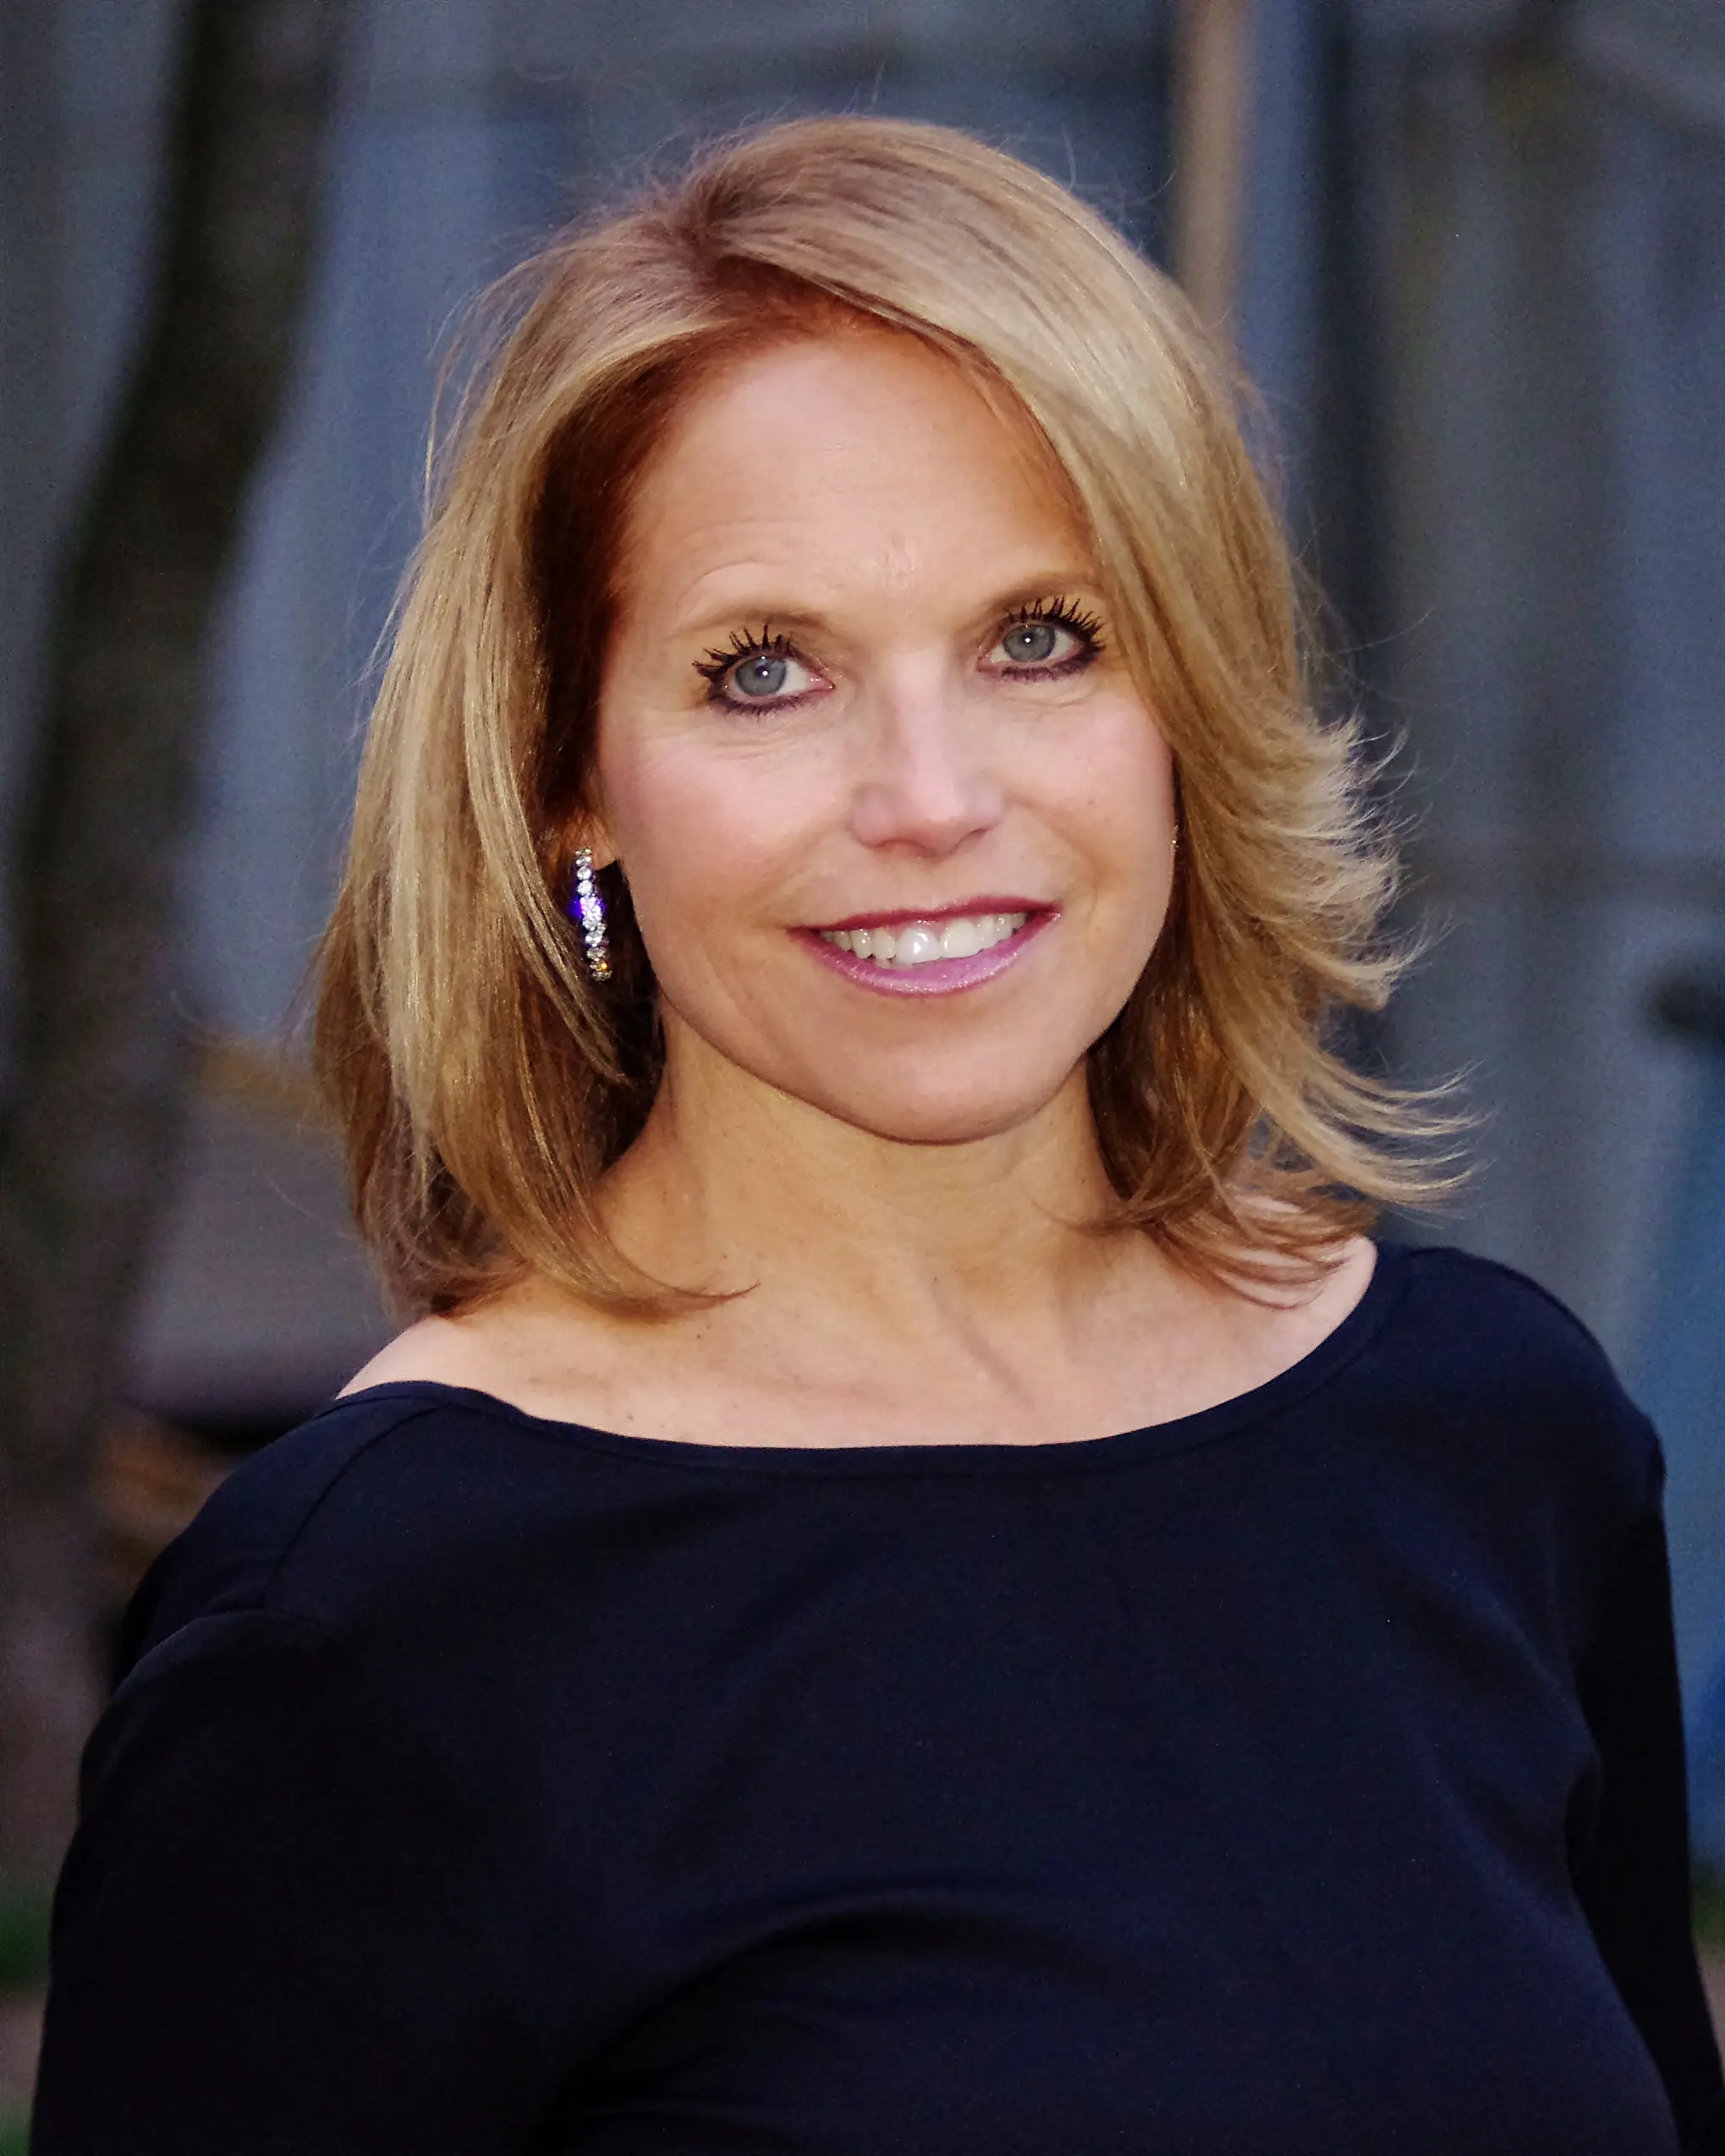 Katie Couric To Host 'Jeopardy!' Following Final Episodes Airing With Alex Trebek